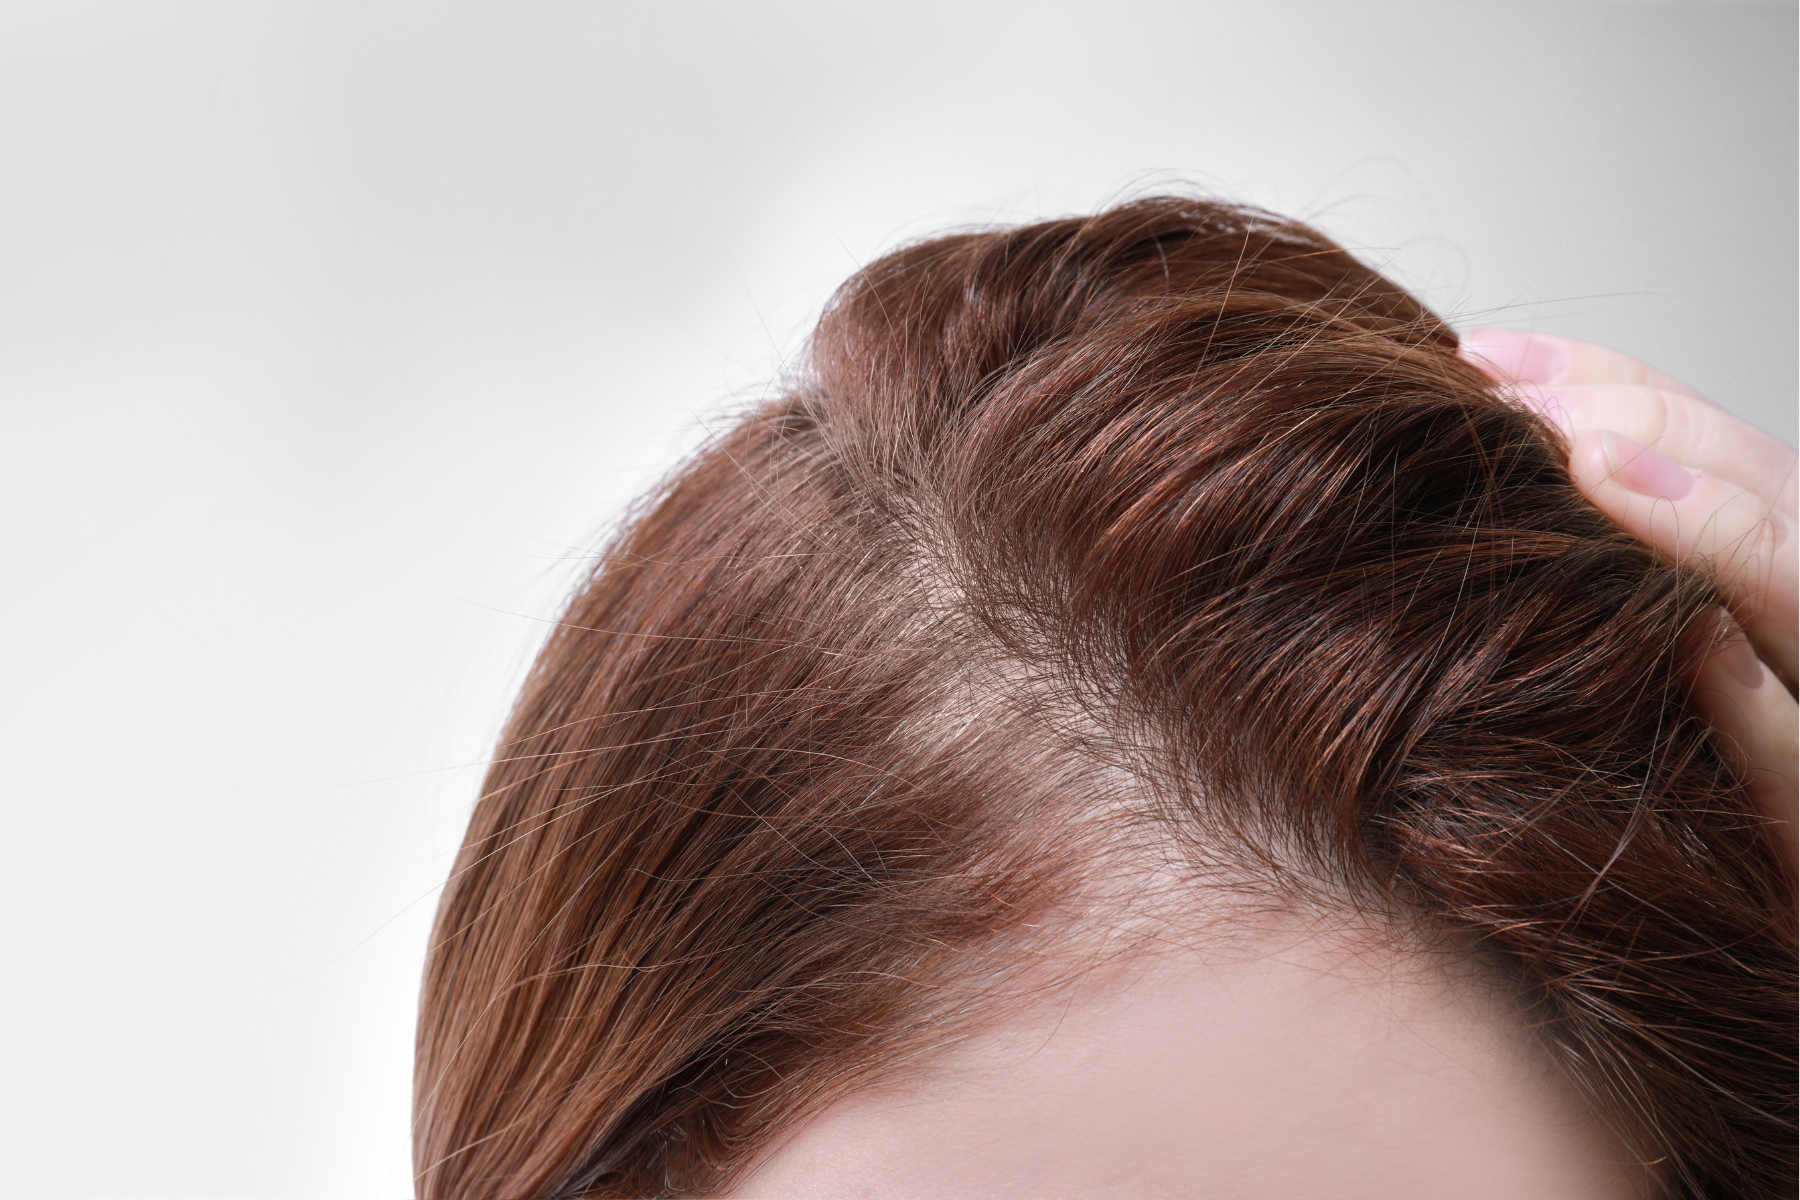 The Stages of Female Patterned Baldness